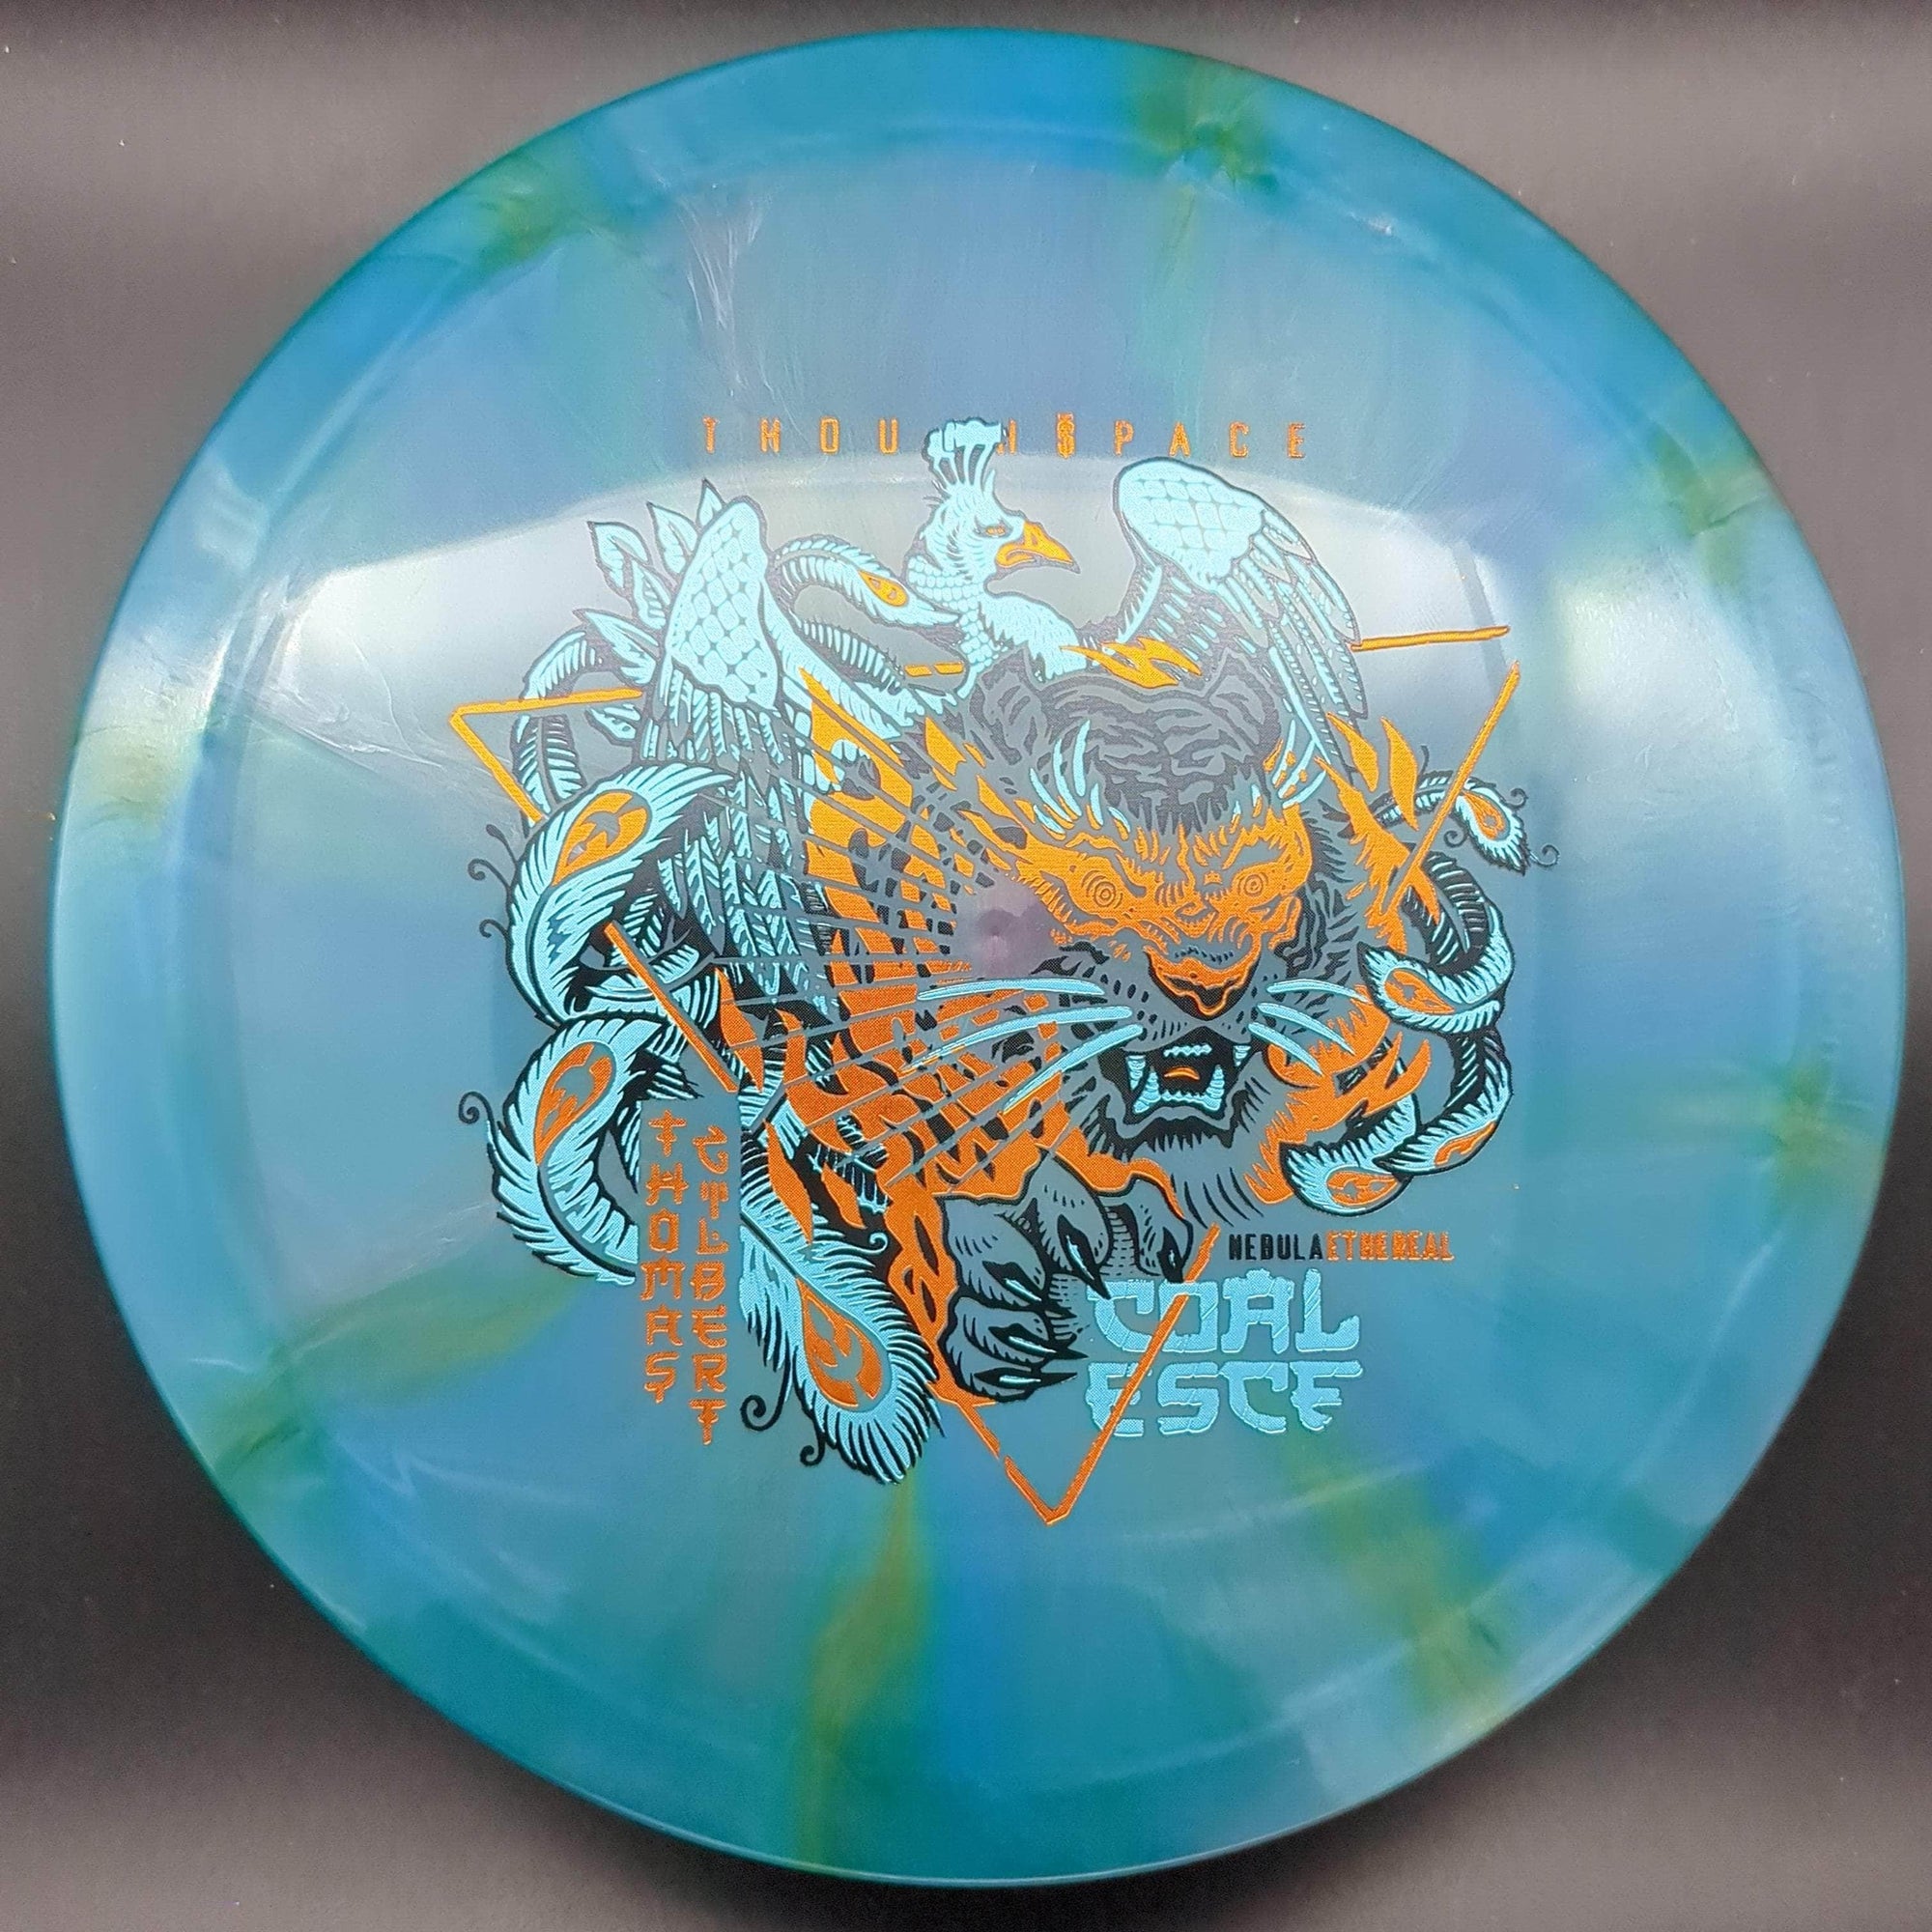 Thought Space Athletics Fairway Driver Teal Blue/Copper Stamp 174g Coalesce, Nebula Ethereal, Thomas Gilbert Signature